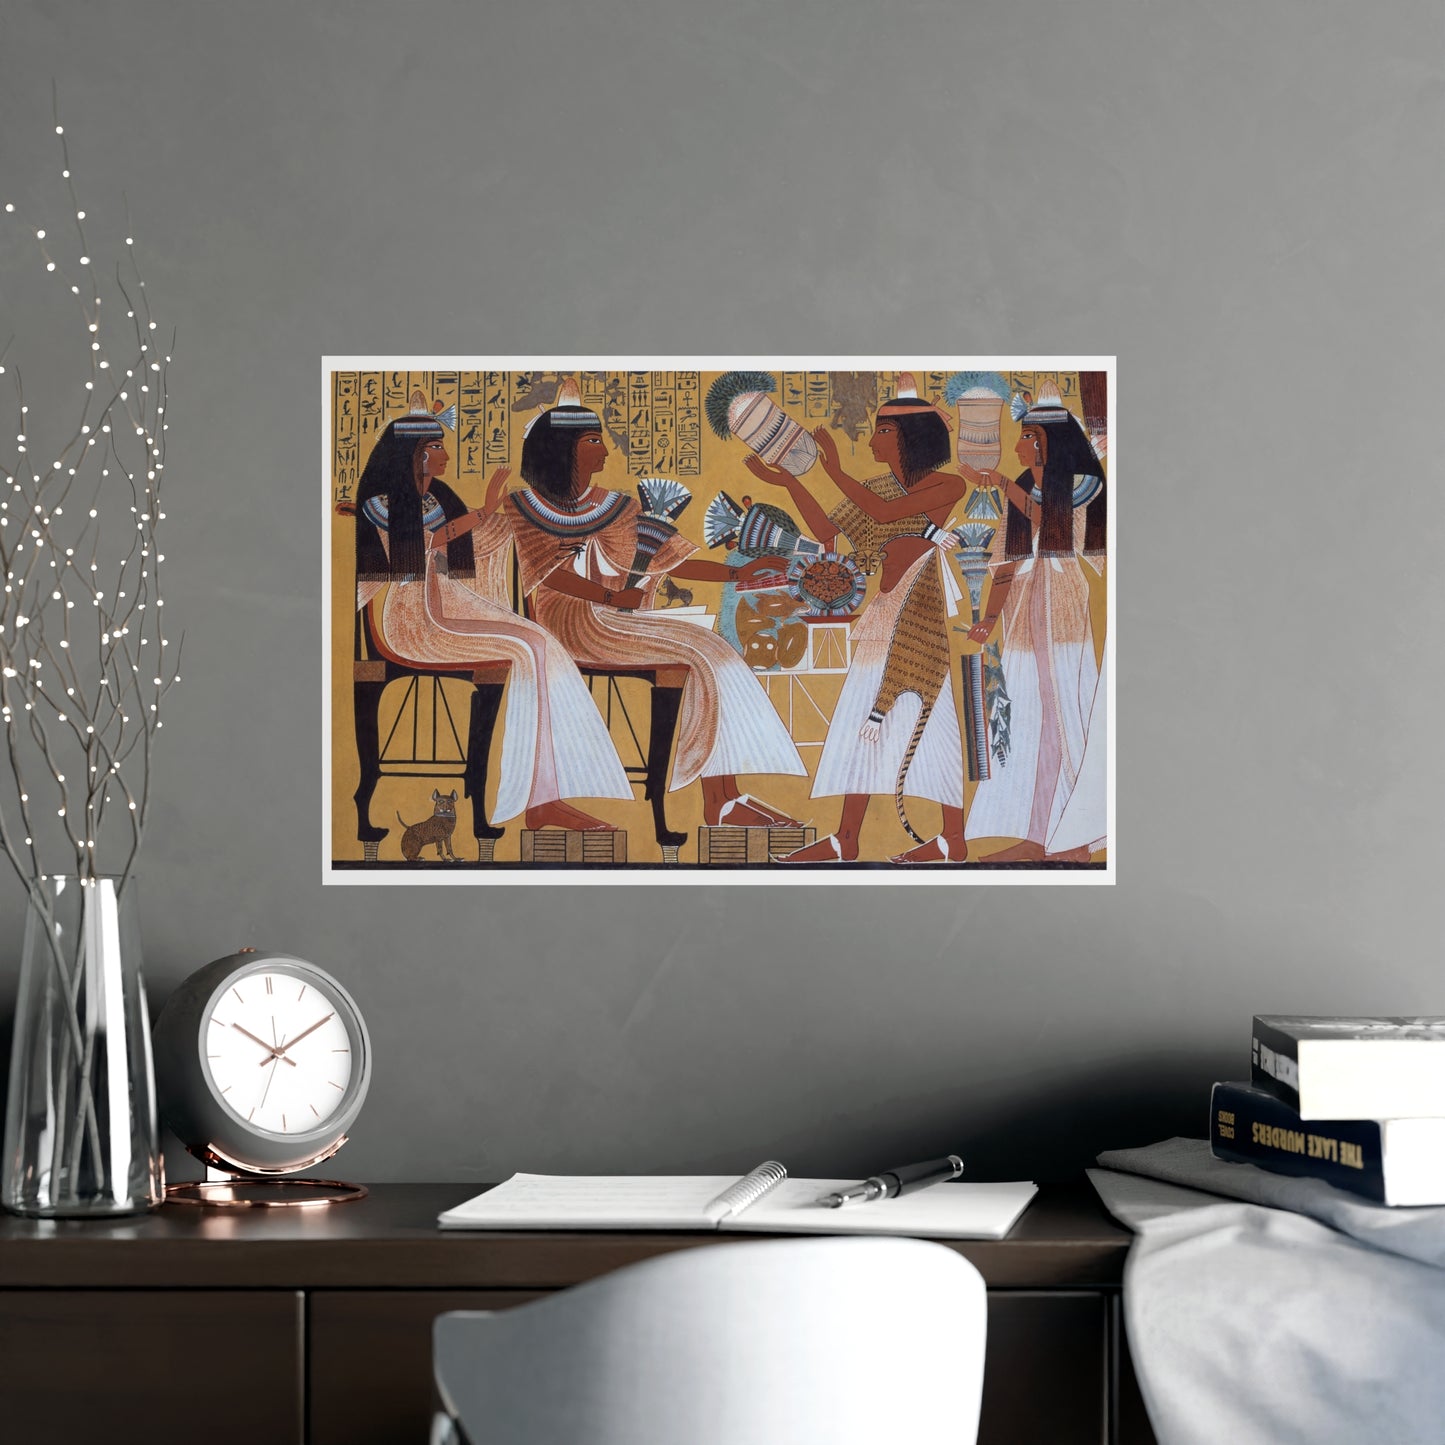 Ipuy and Wife Receive Offerings from Their Children - Wall Print